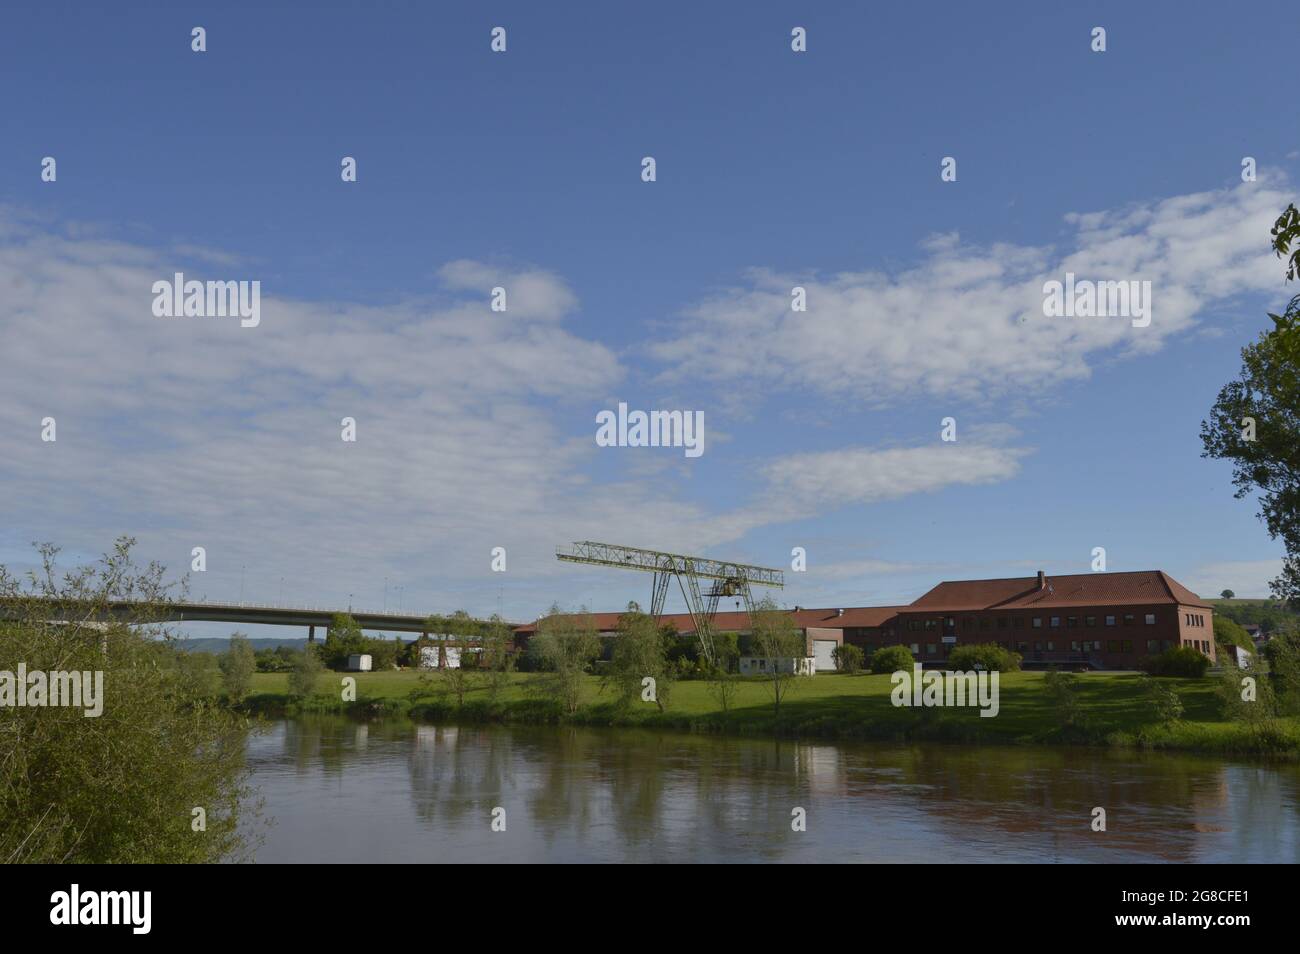 The Weser river in Vlotho, Germany Stock Photo